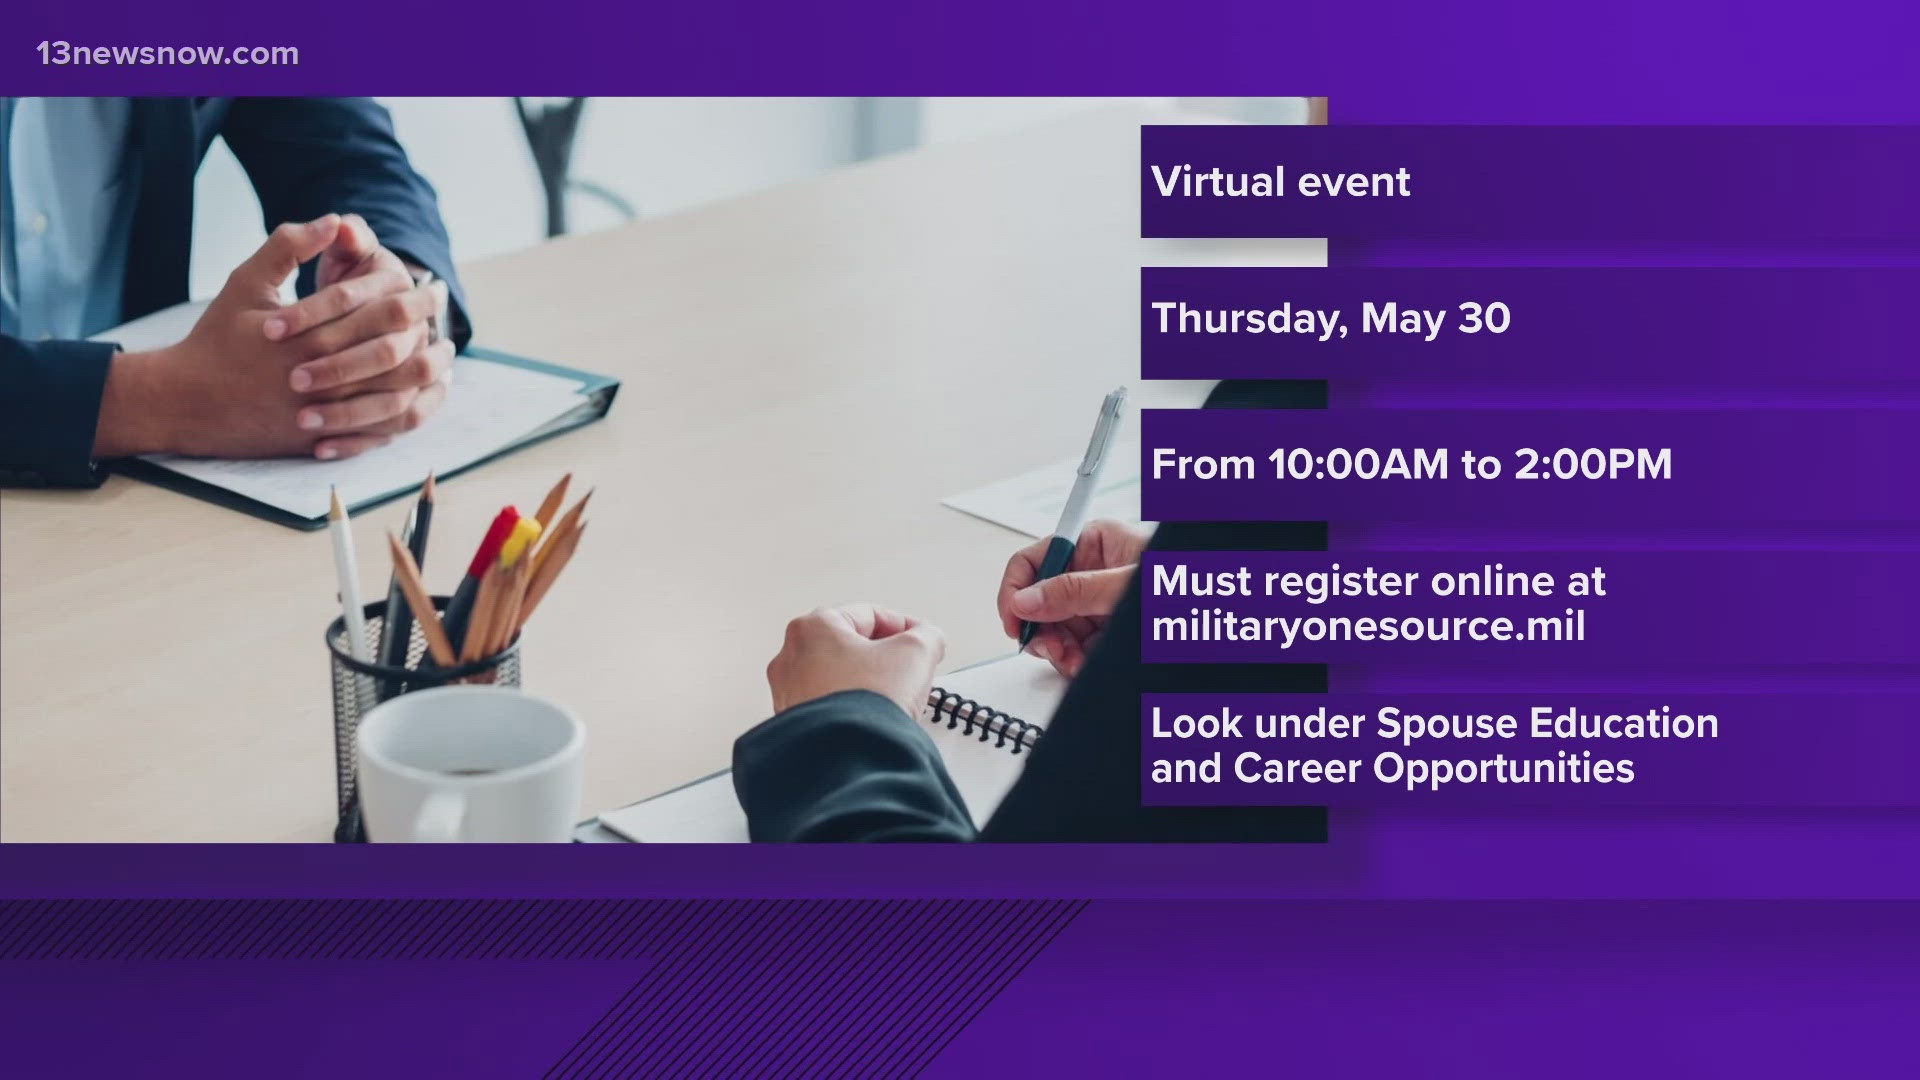 The Department of Defense is hosting a virtual hiring fair for military spouses, to help them connect with hiring managers and representatives.